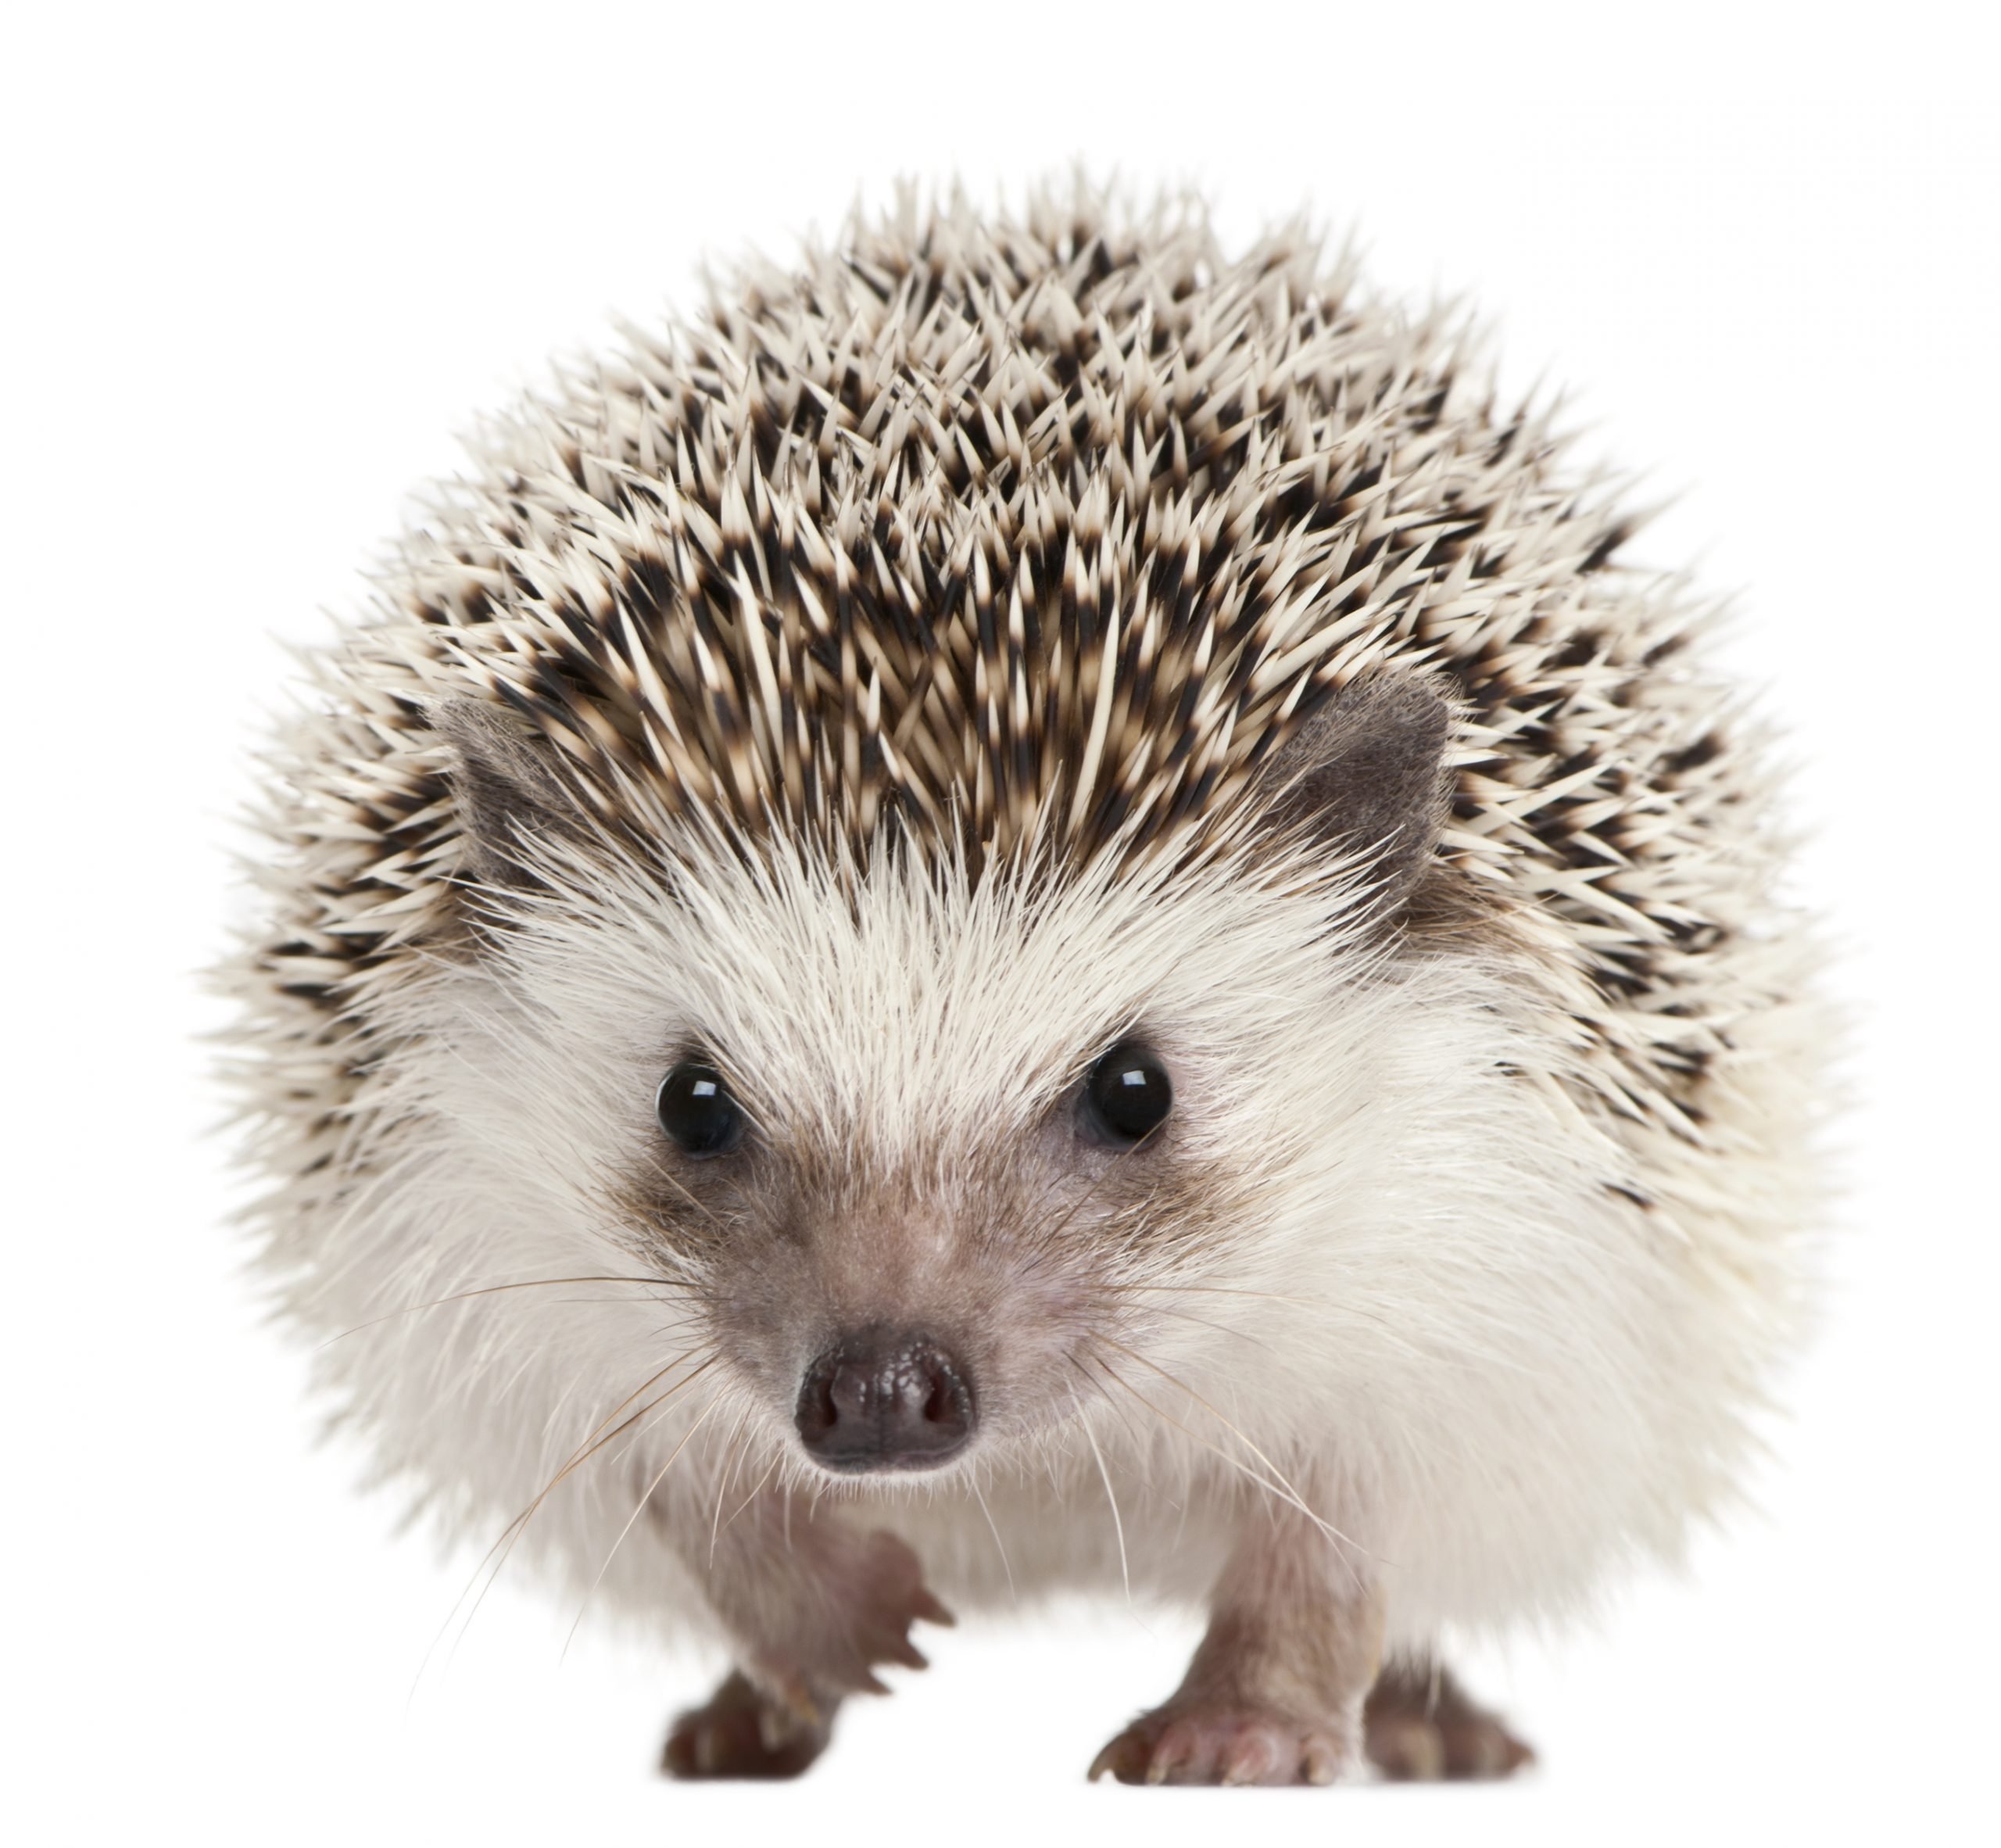 Four-toed Hedgehog, Atelerix albiventris, 2 years old, in front of white background